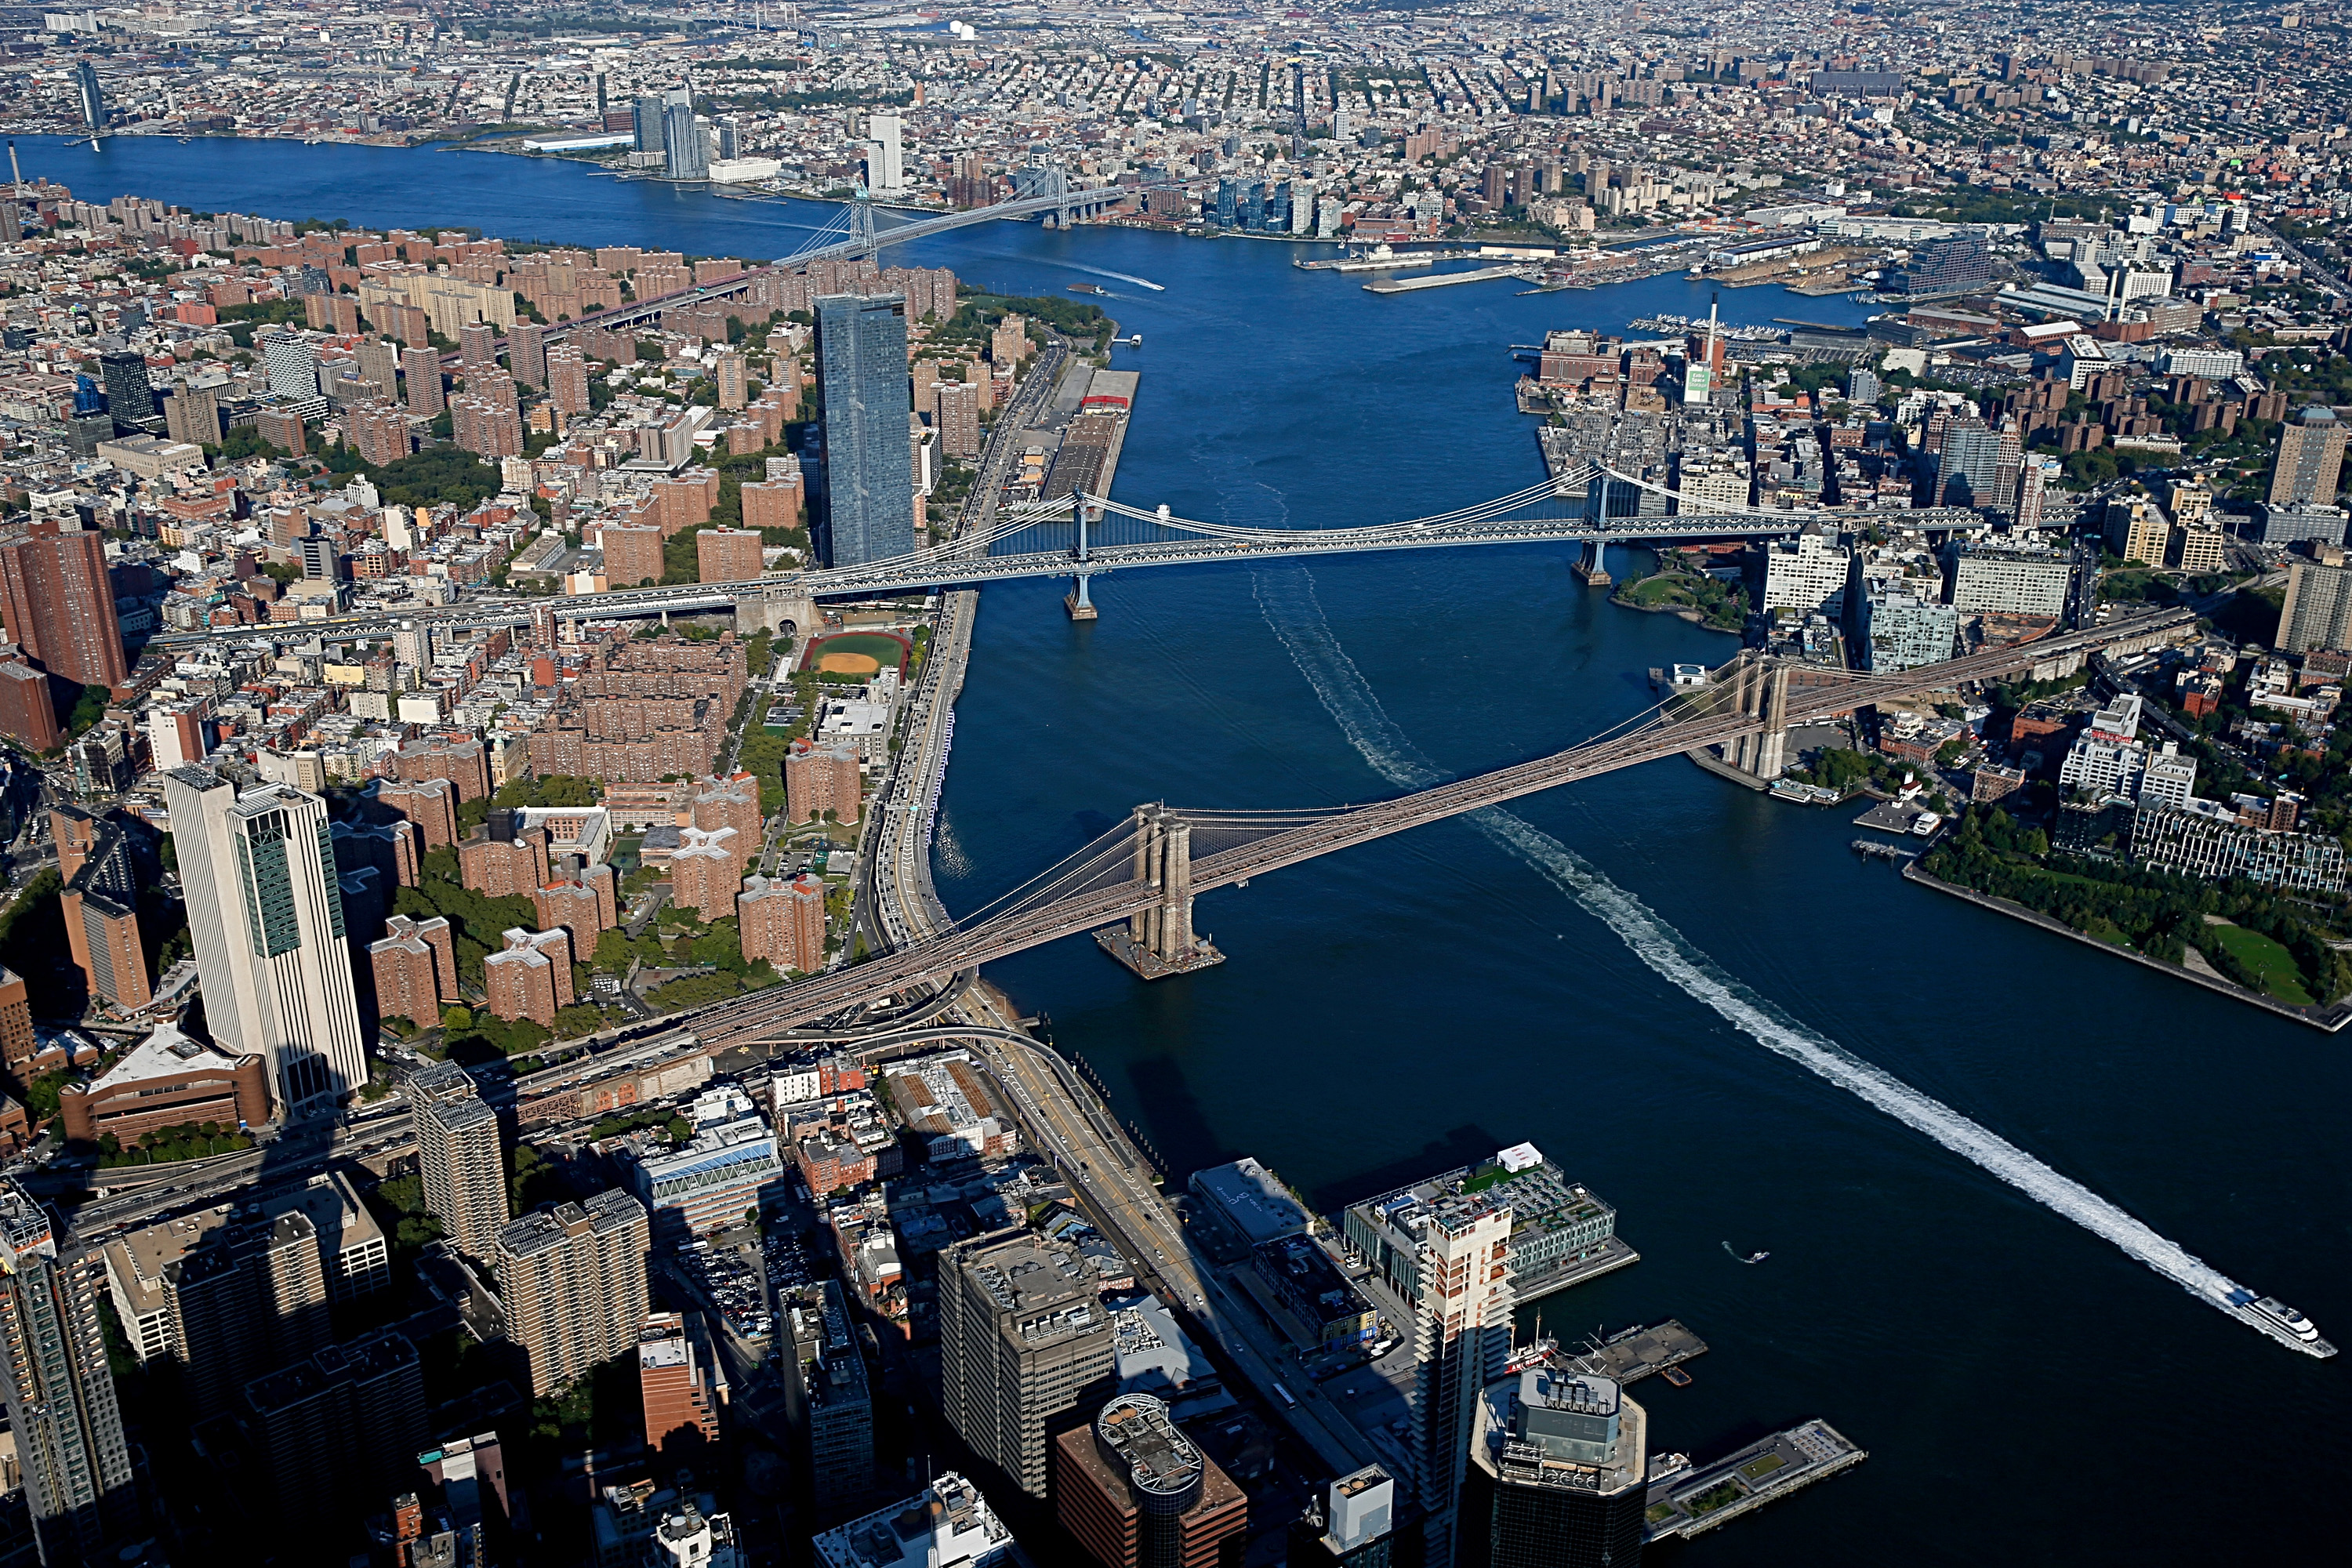 An aerial view of New York City's East River and Harbor.